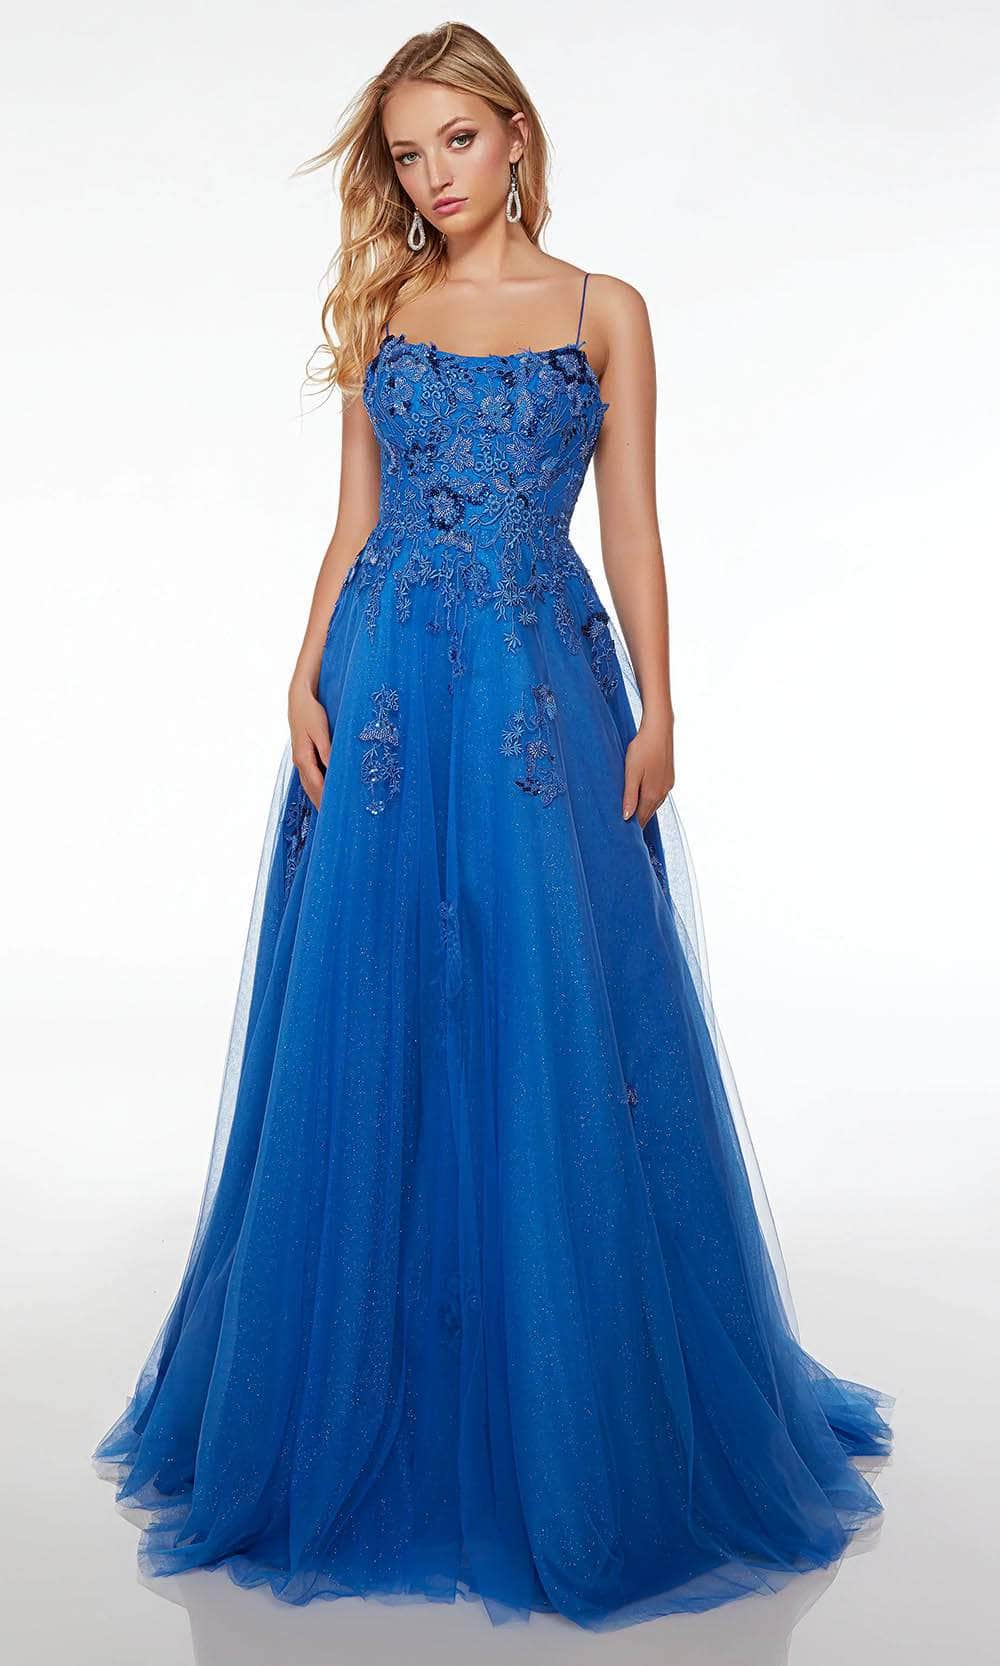 Alyce Paris 61479 - Embellished A-Line Prom Gown Special Occasion Dresses